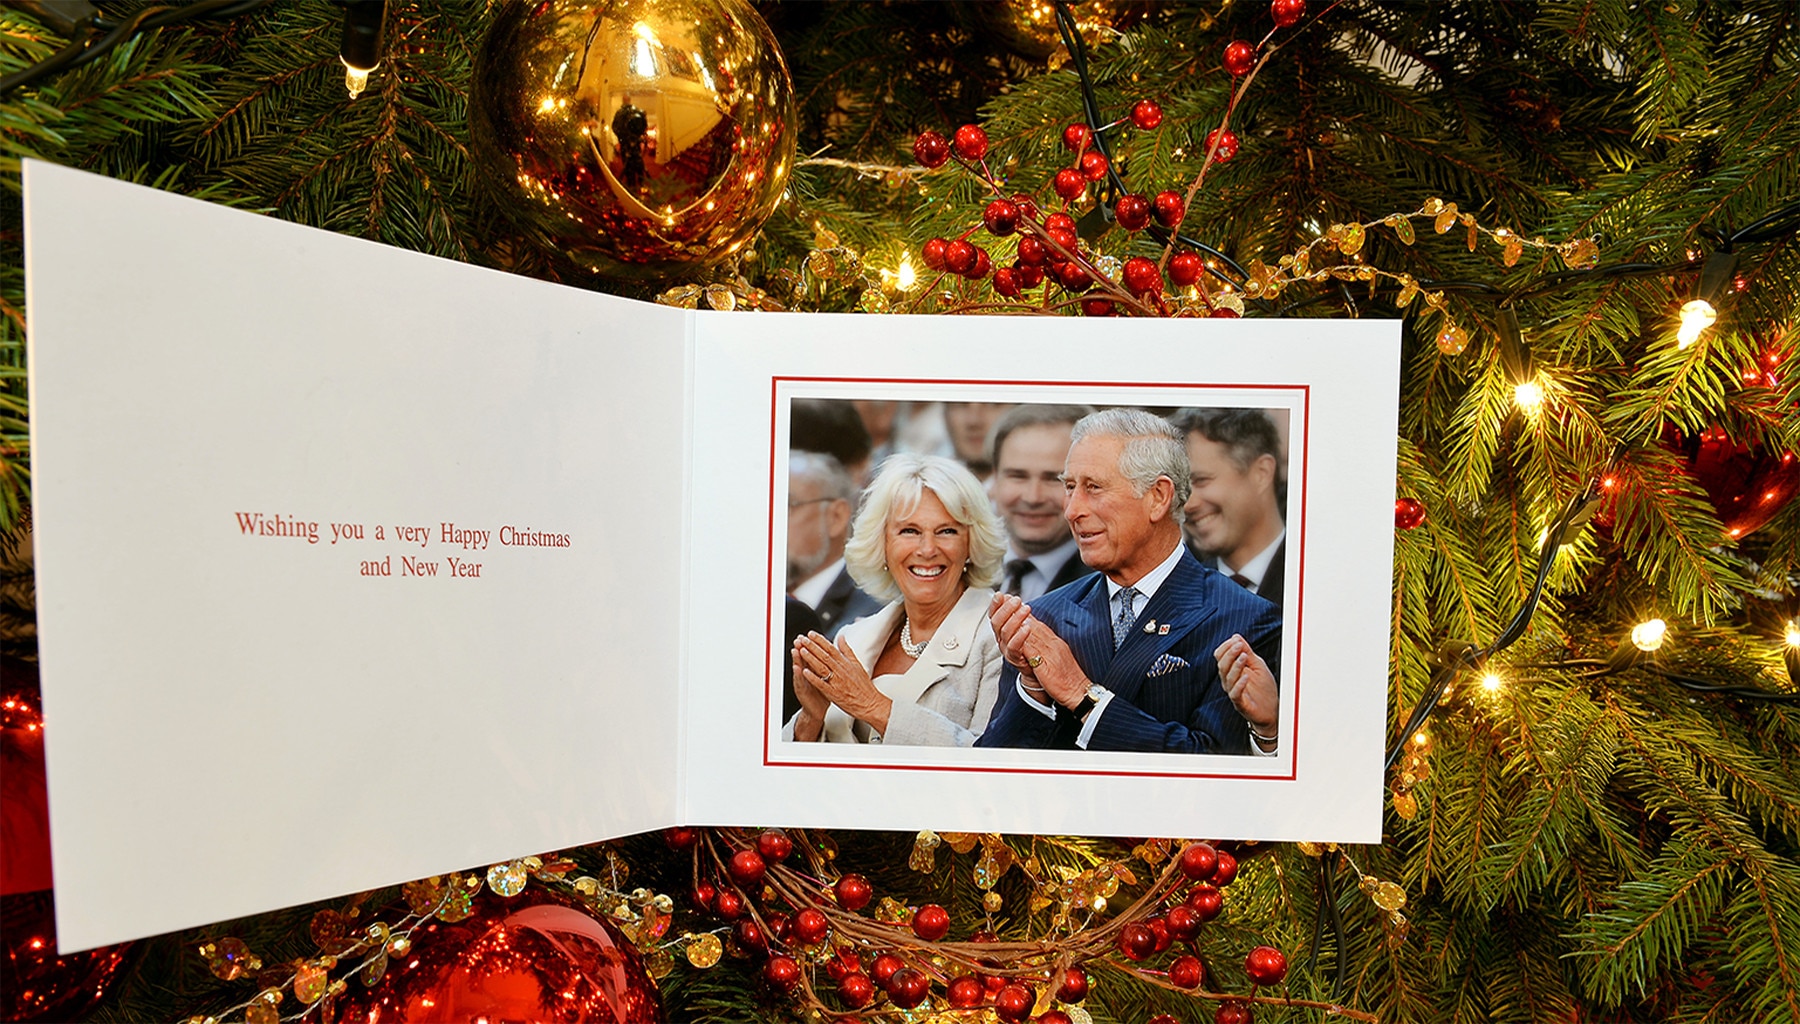 2014 from Royal Christmas Cards Through the Years | E! News